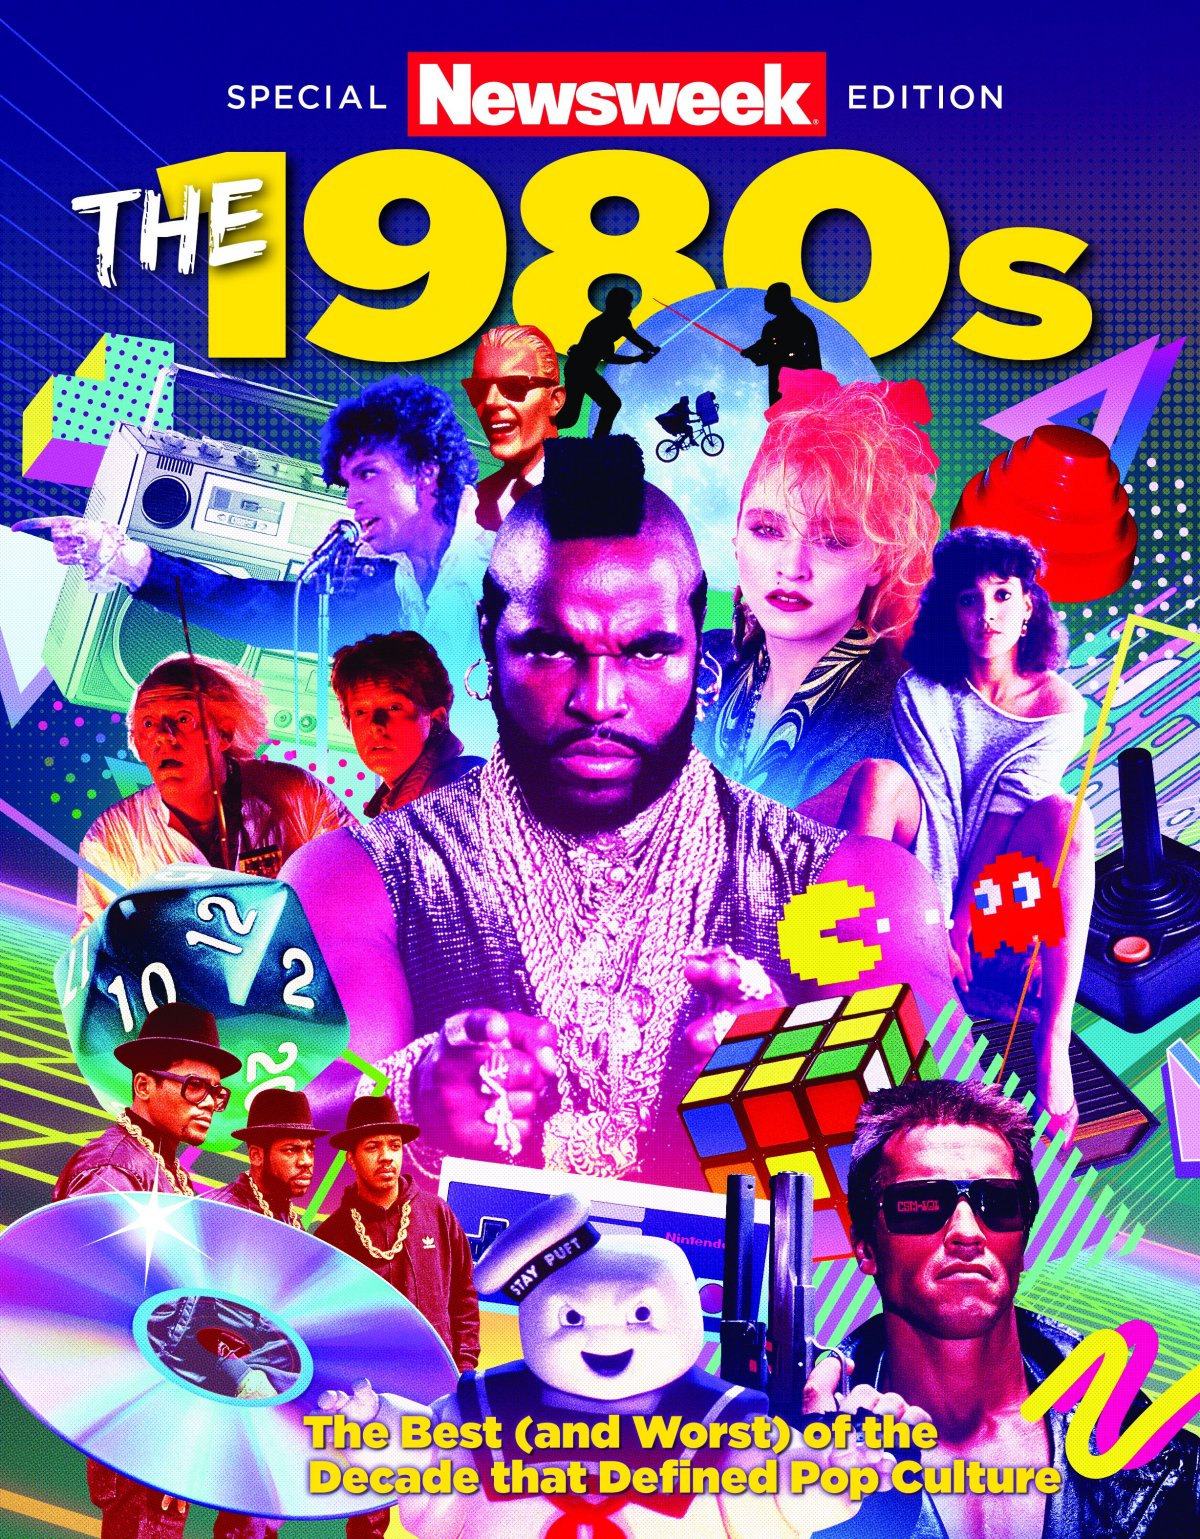 Why Do We Love the '80s So Much?